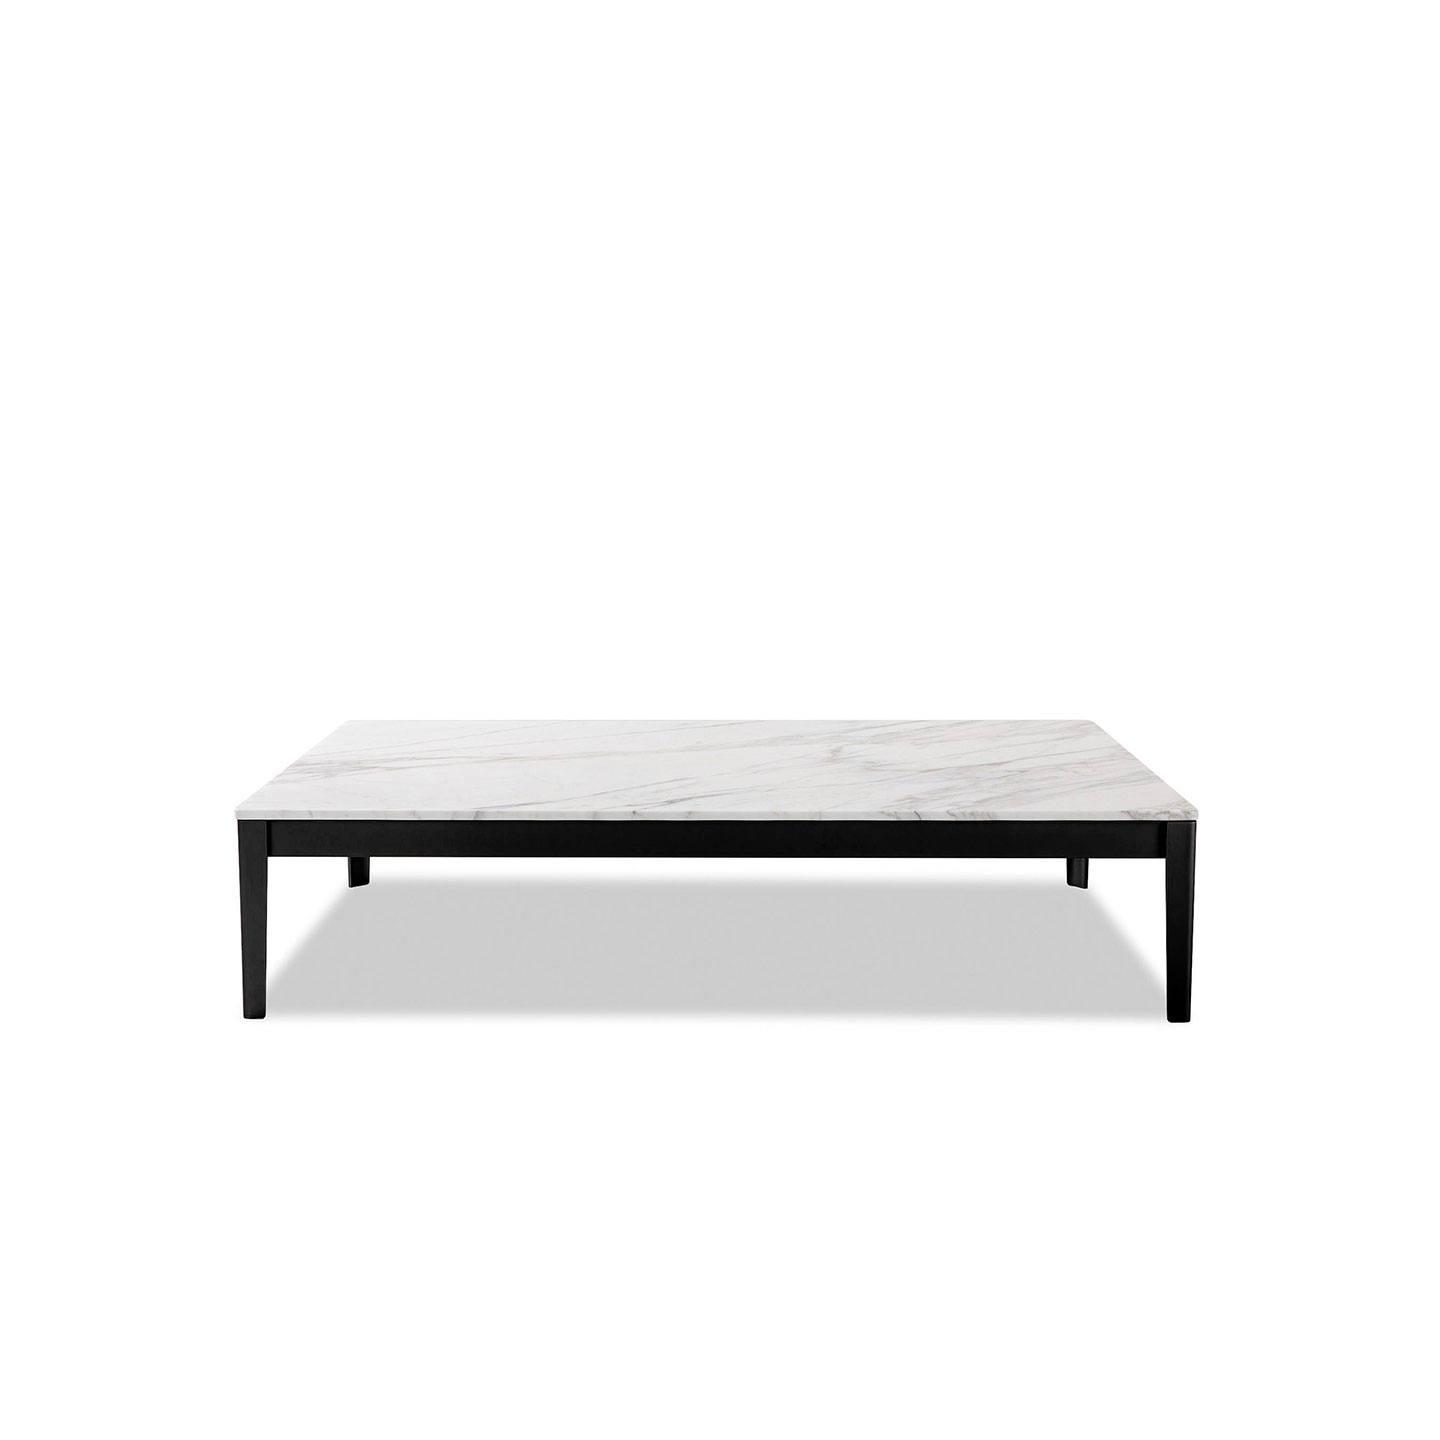 Haworth Cotone table 4 legged in white carrara marble solid surface color